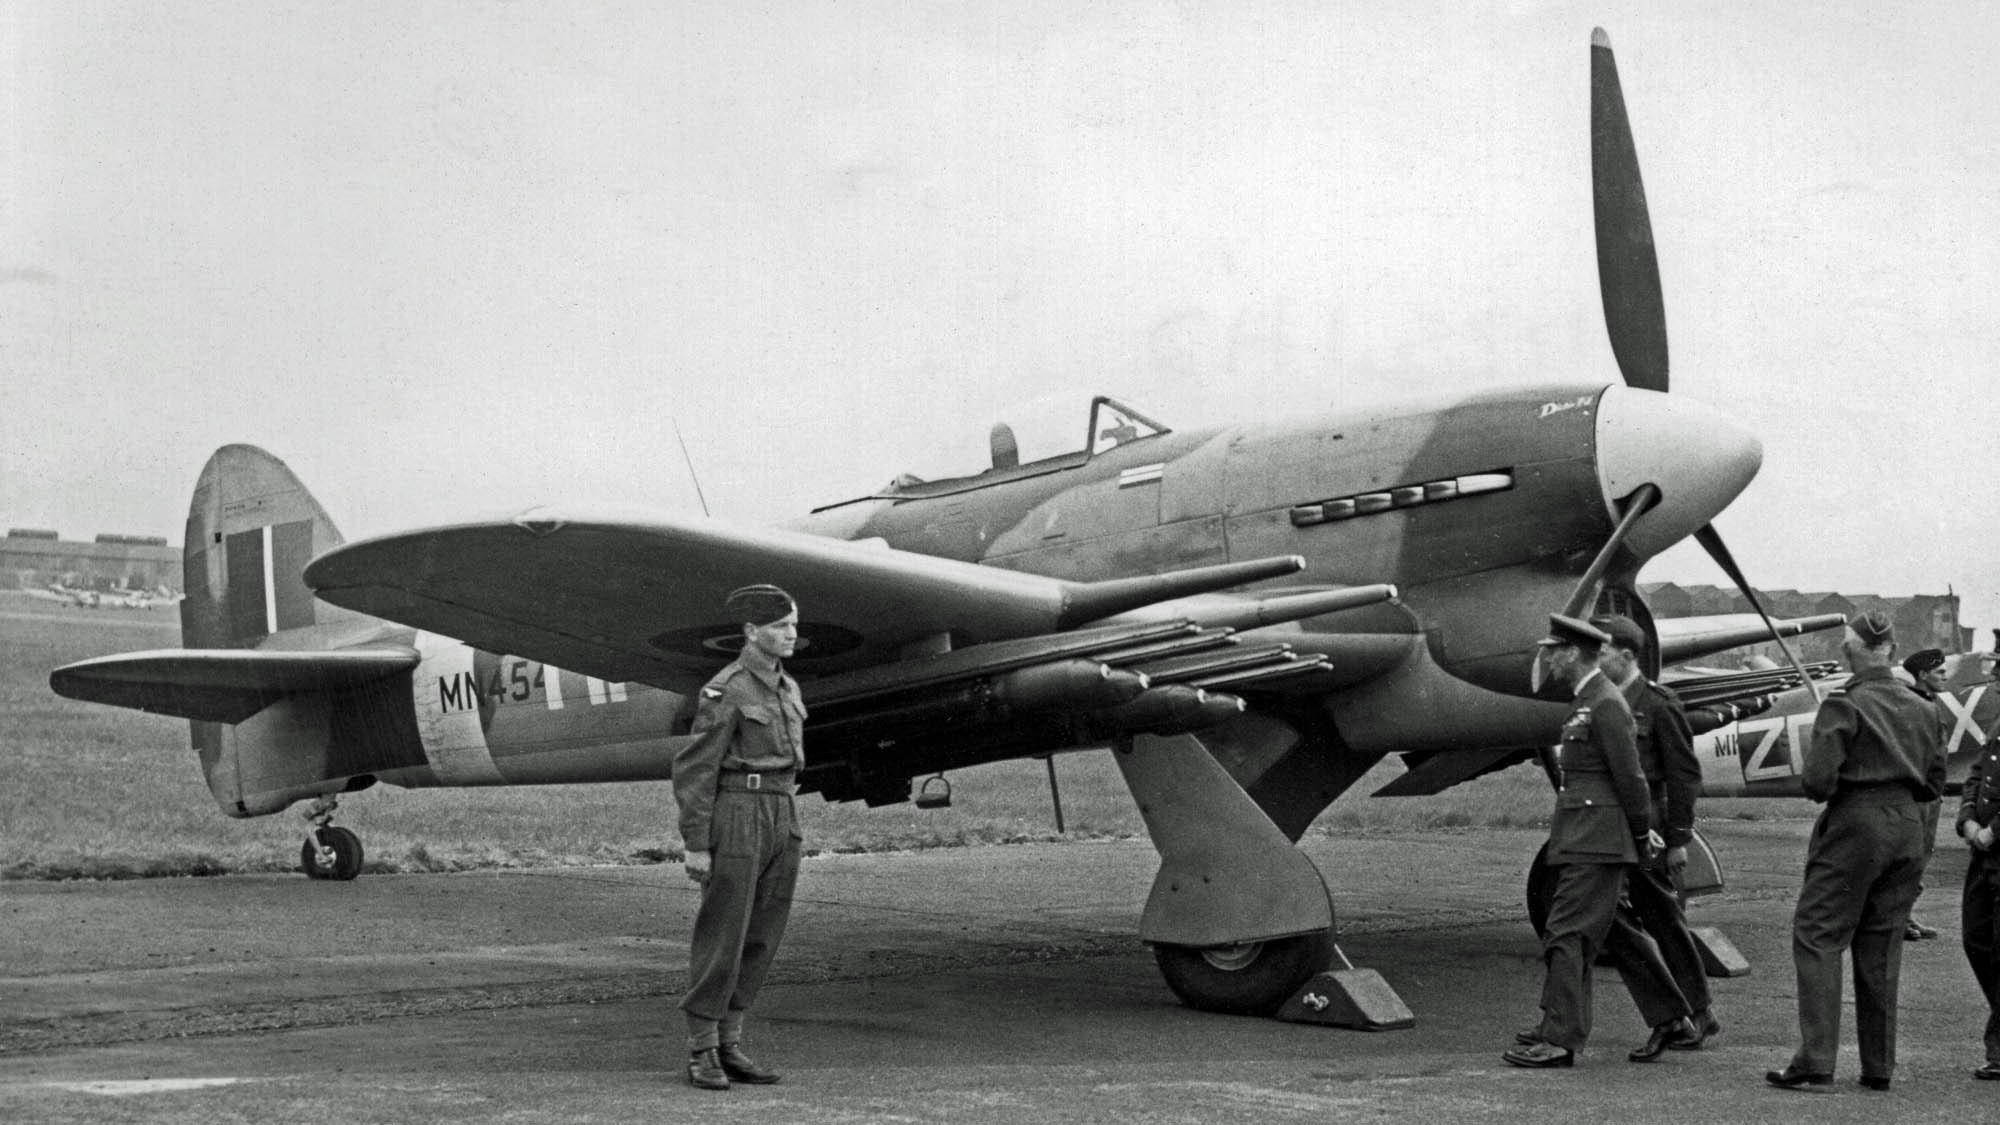 British Hawker Typhoon ground attack aircraft, armed with four cannons, eight unguided air-to-ground rockets and two 500- or 1,000-pound bombs. The Royal Air Force contributed the Hawker Typhoon for tactical attacks on various types of ground targets during the implementation of the Transportation Plan. (USAAF archival photo)